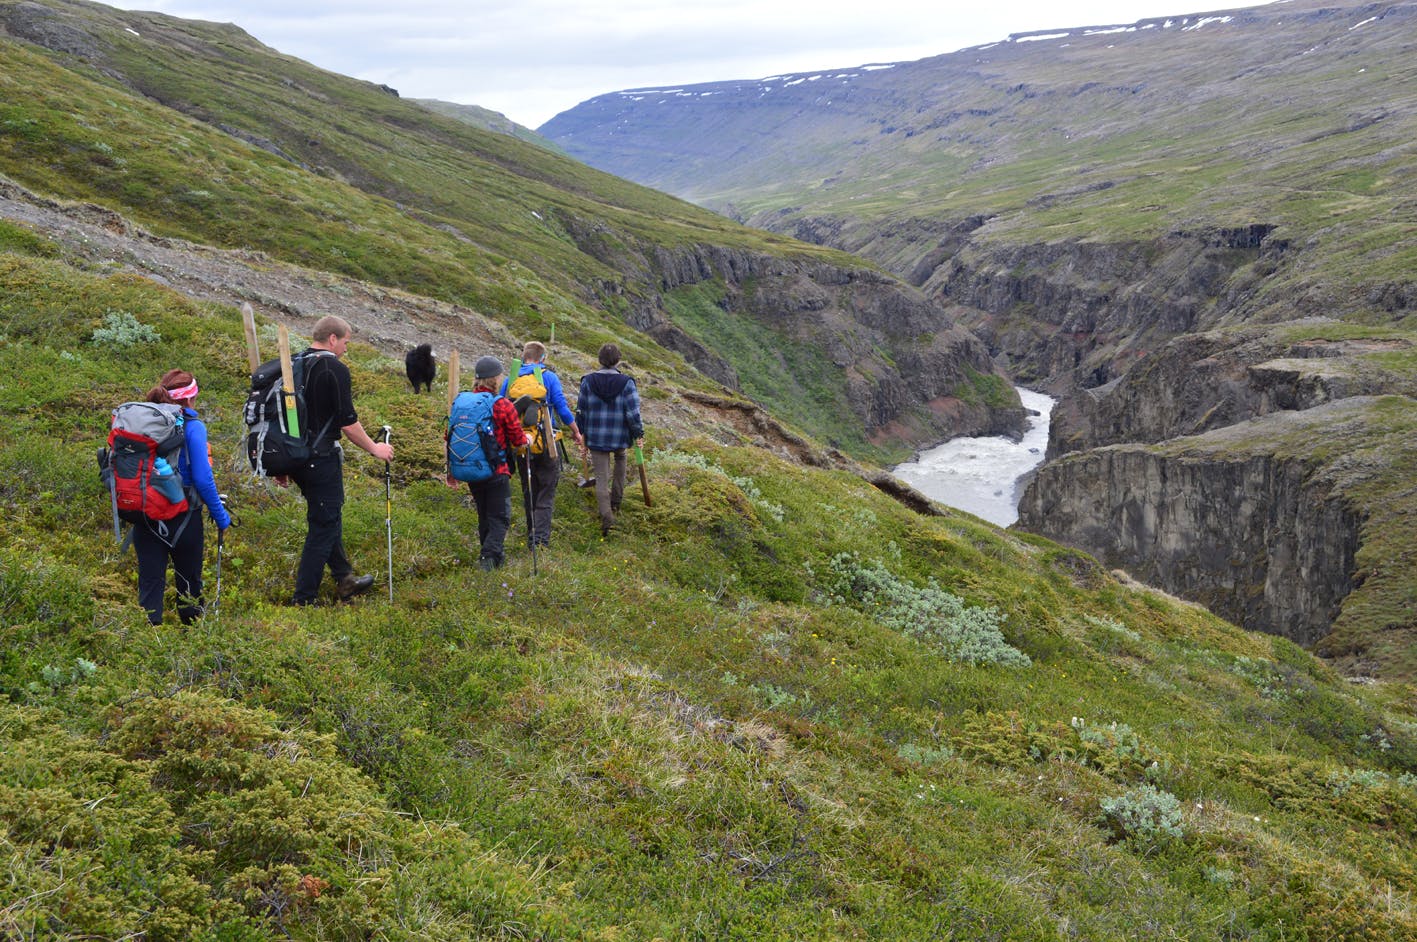 Hikers passing a river gorge in east Iceland.